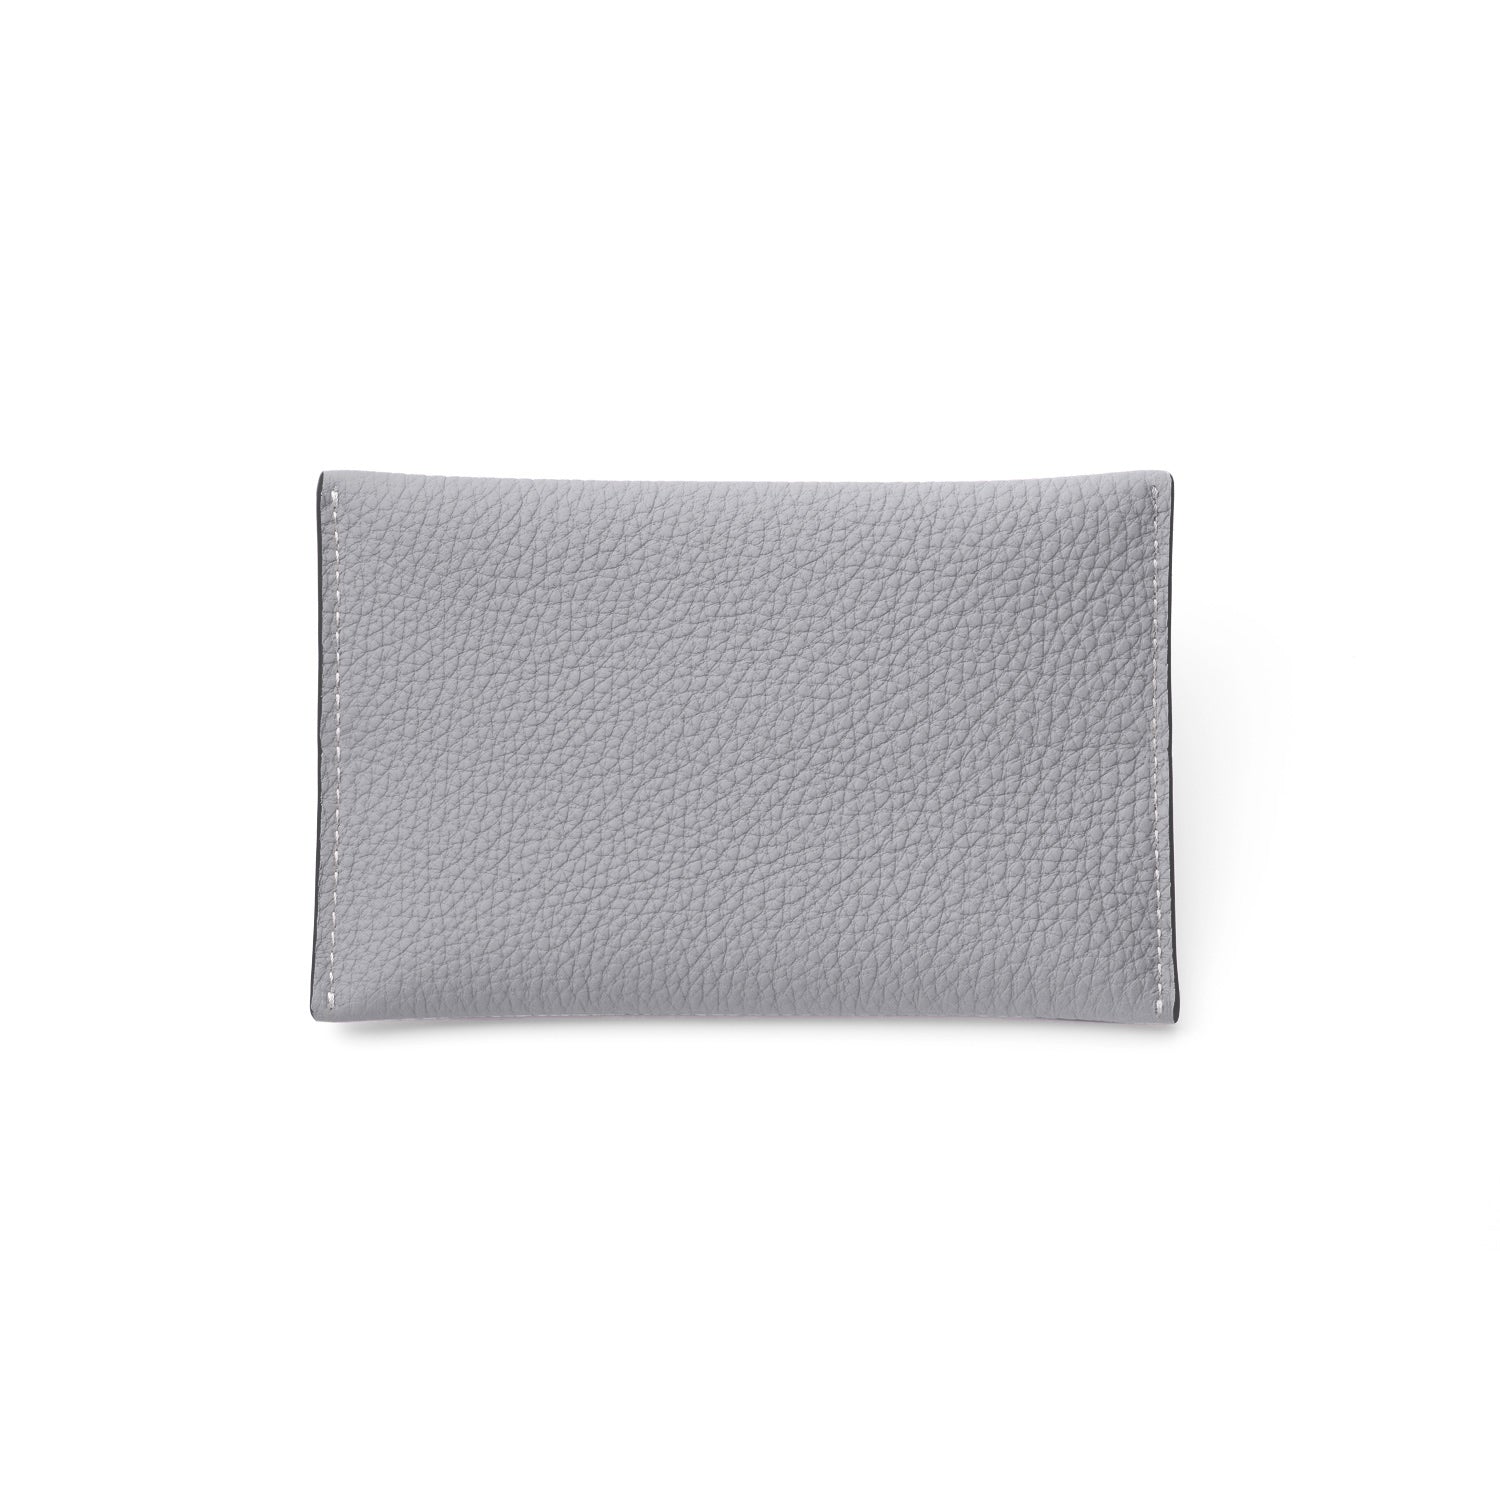 Tissue case in shrink leather